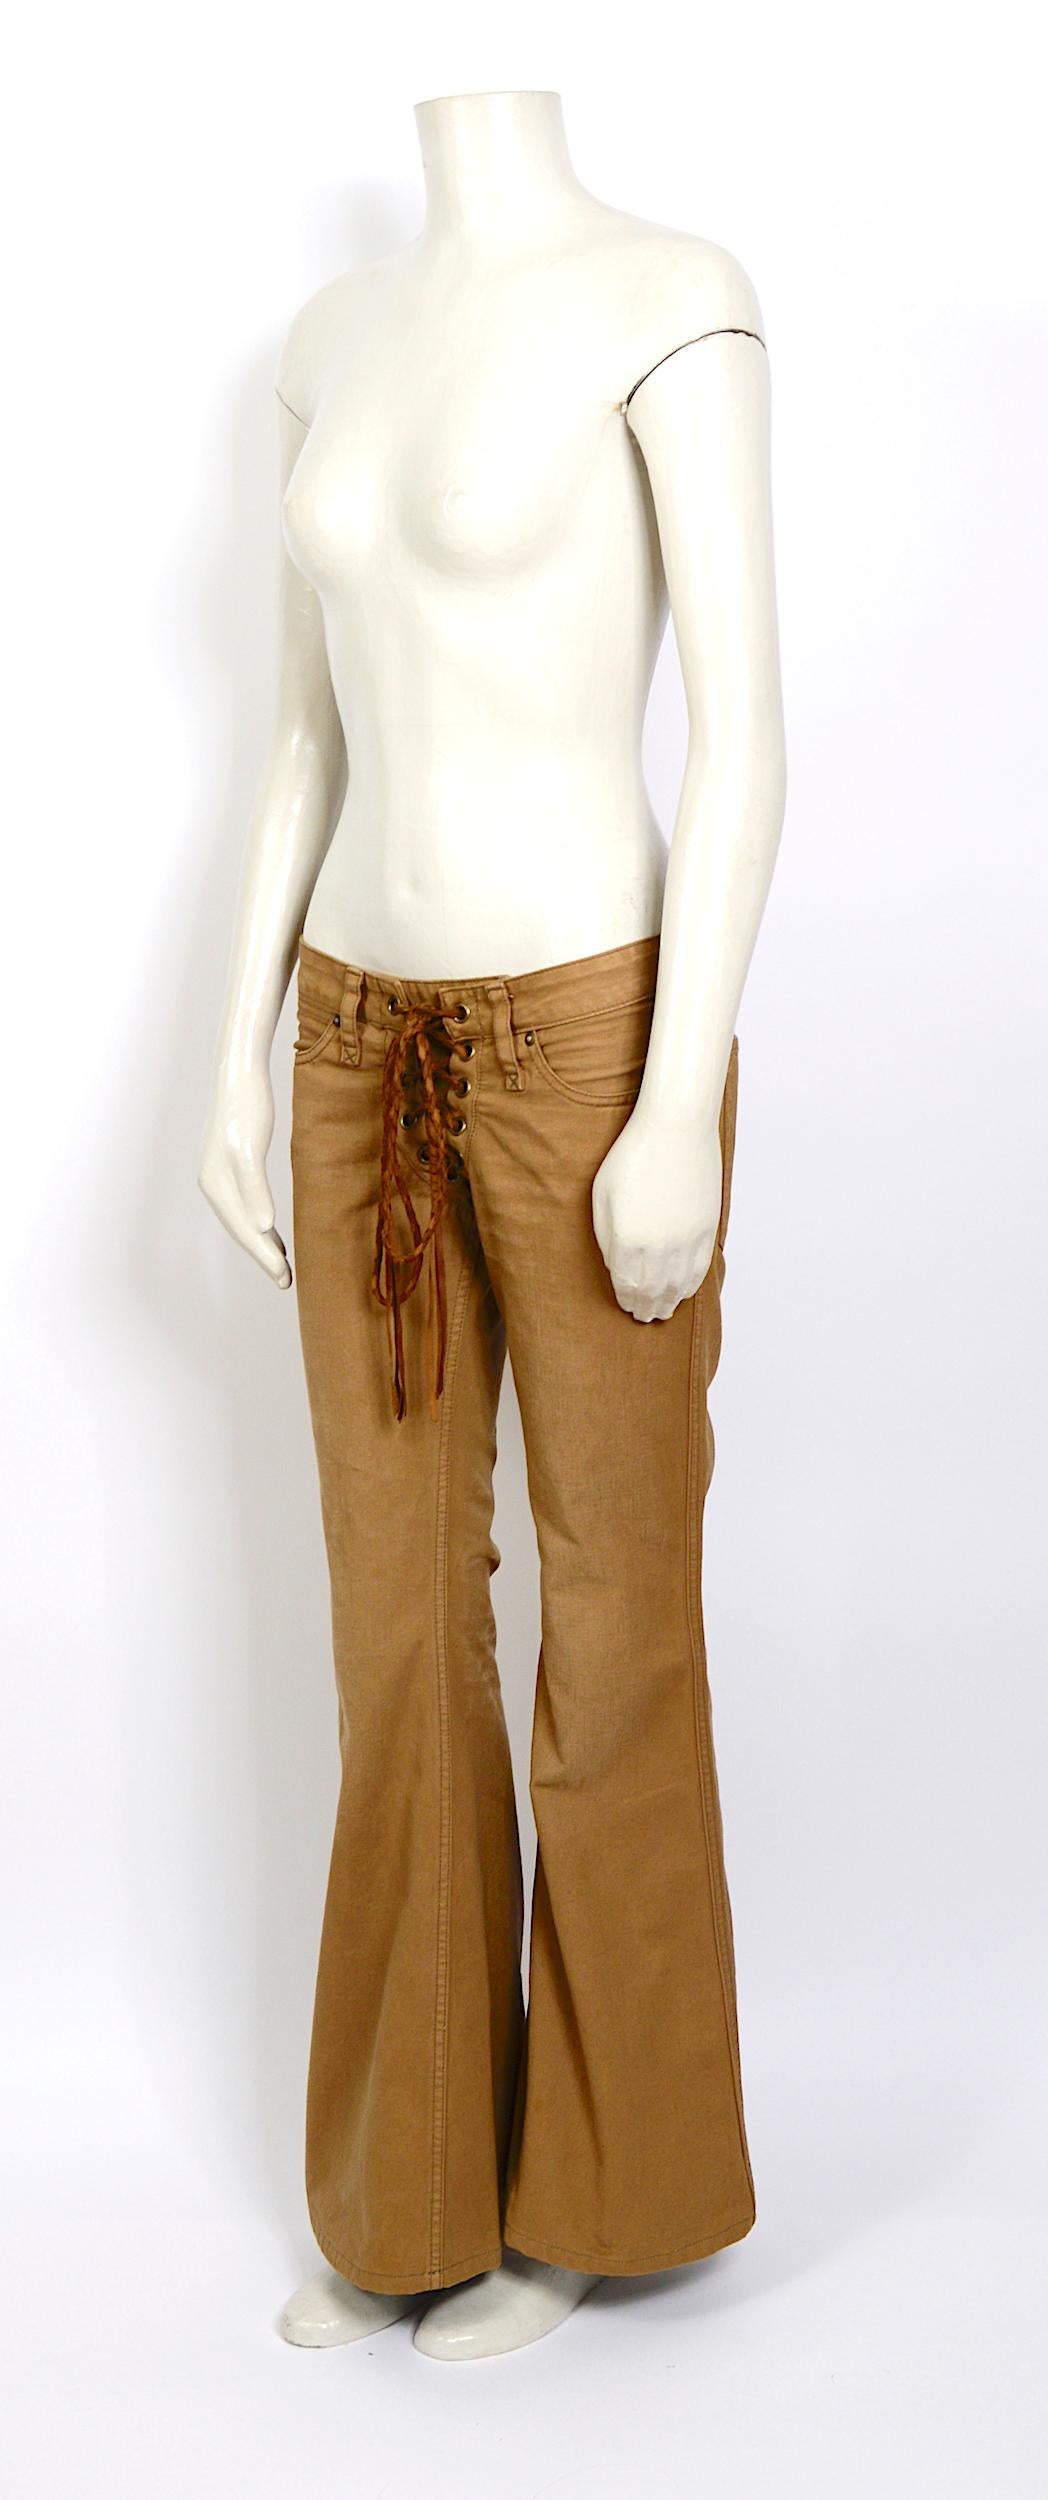 Brown Chloe by Stella McCartney late 90s vintage lace-up low waist bell bottom pants